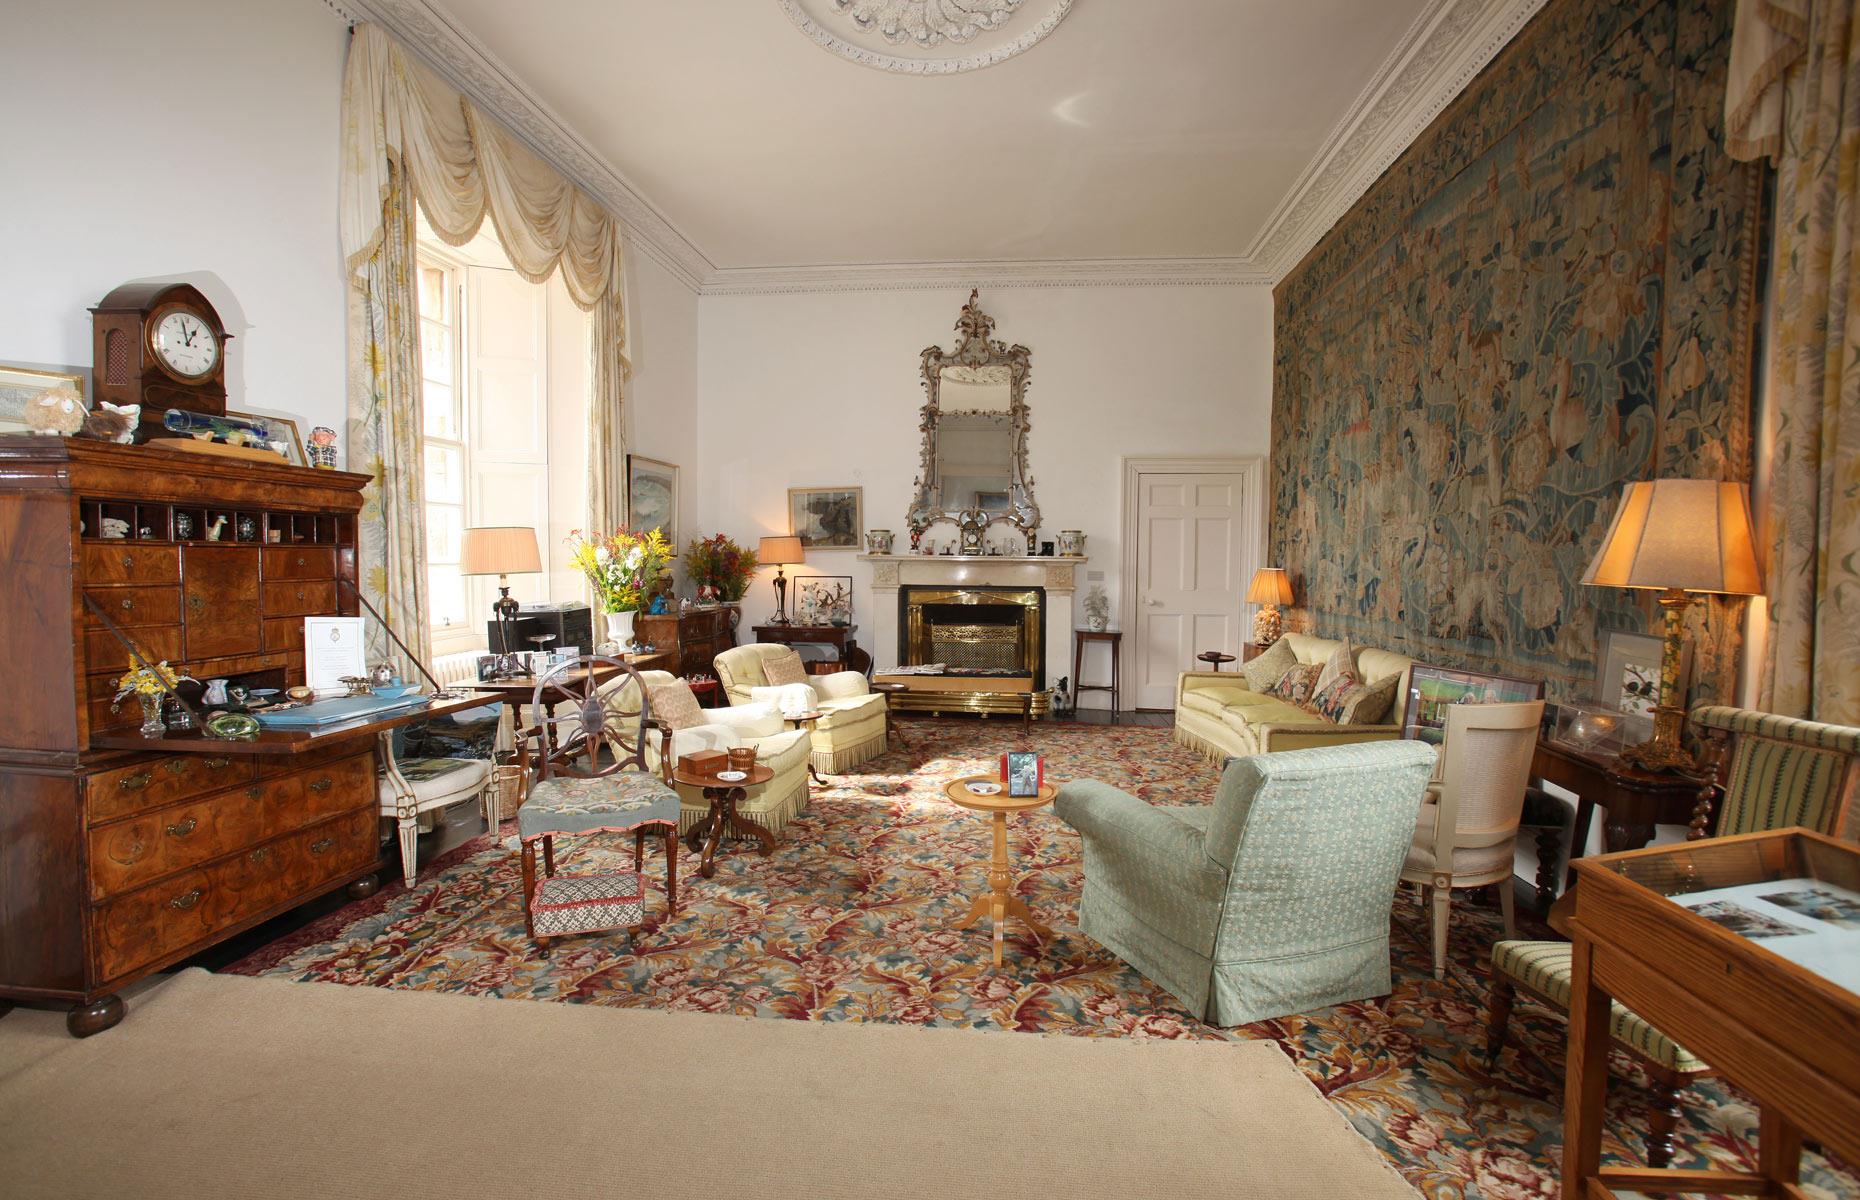 <p>Named Barrogill Castle when she bought it, the Queen Mother reinstated its original name of Castle of Mey before moving in and undertook an extensive restoration of the building, removing many of its 19th-century additions.</p>  <p>Here's the drawing room, filled with vintage furniture and plenty of charm. Falling for its isolated charm, the castle became a much-loved retreat for the Queen Mother, who made annual visits here in summer and autumn. </p>